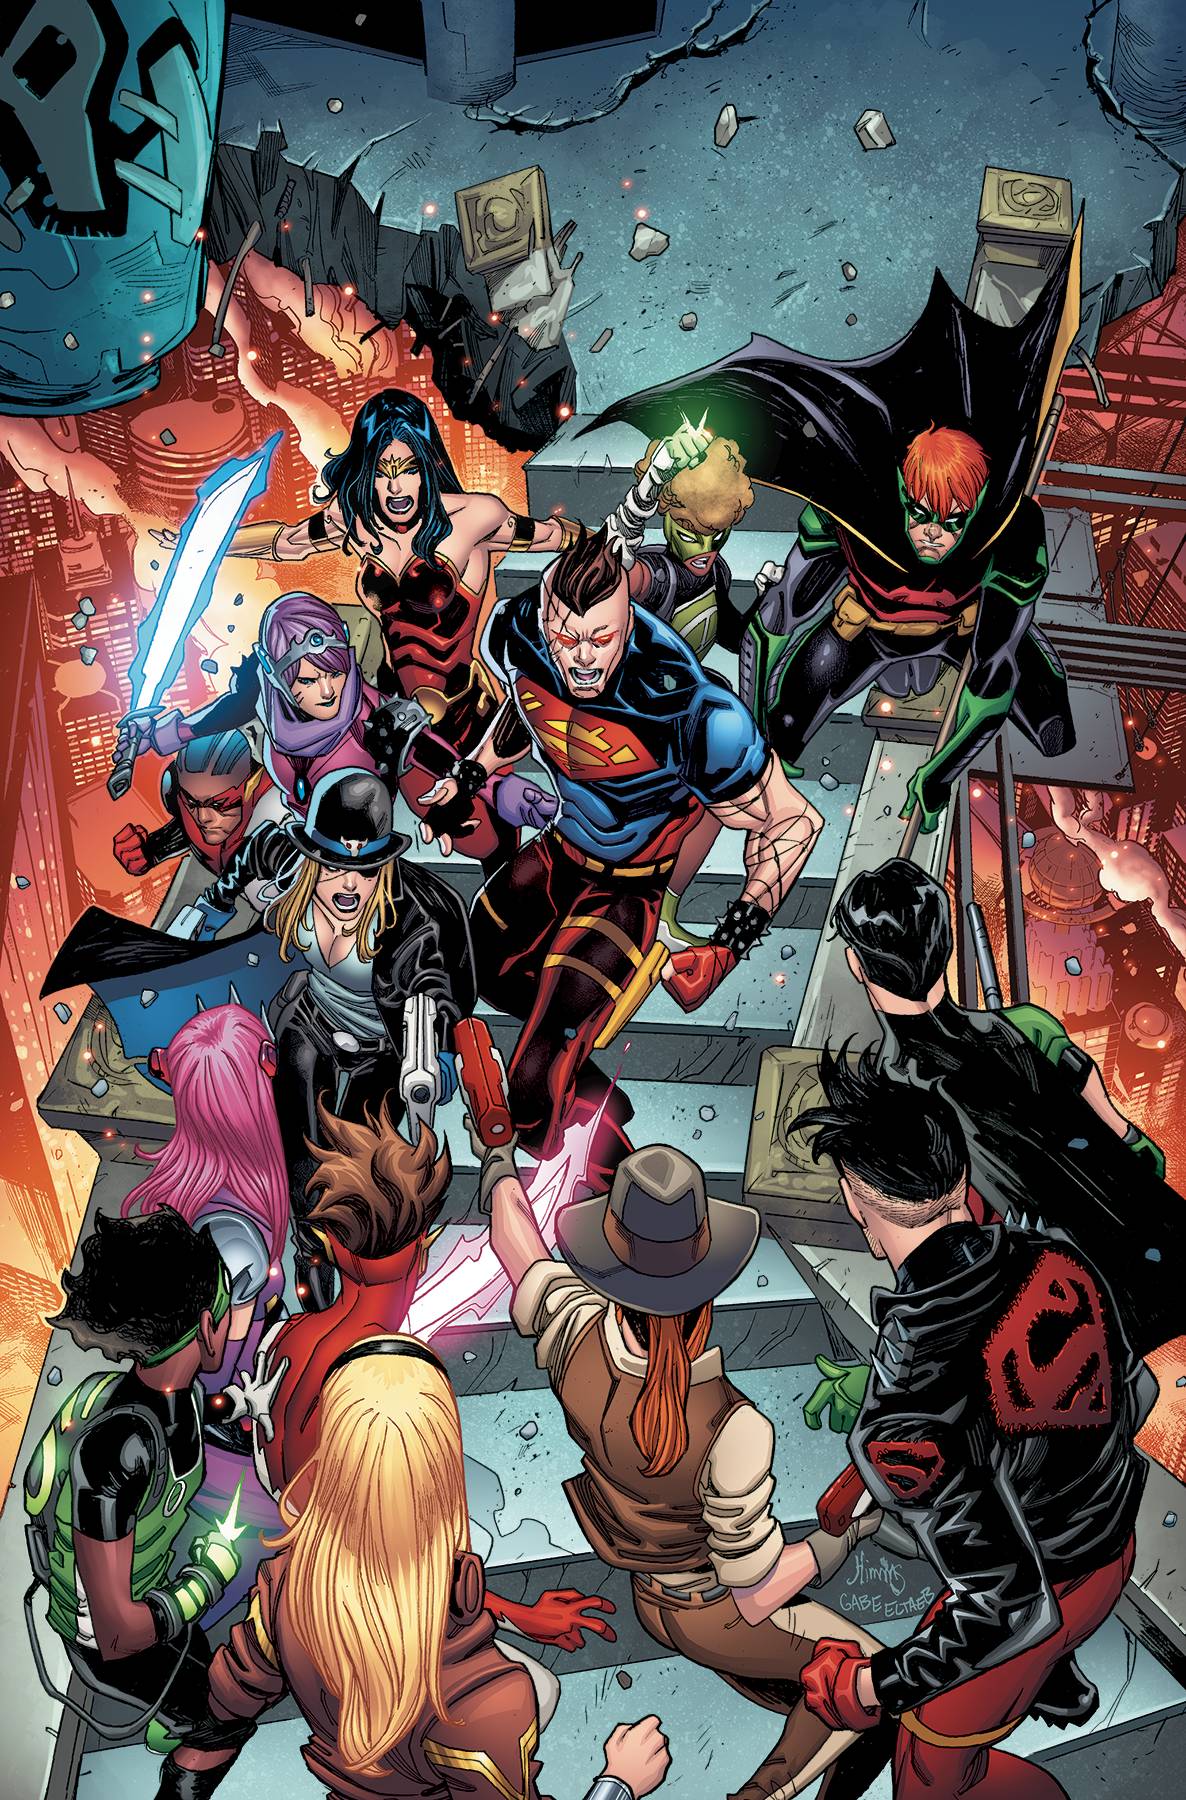 10/02/2019 YOUNG JUSTICE #9